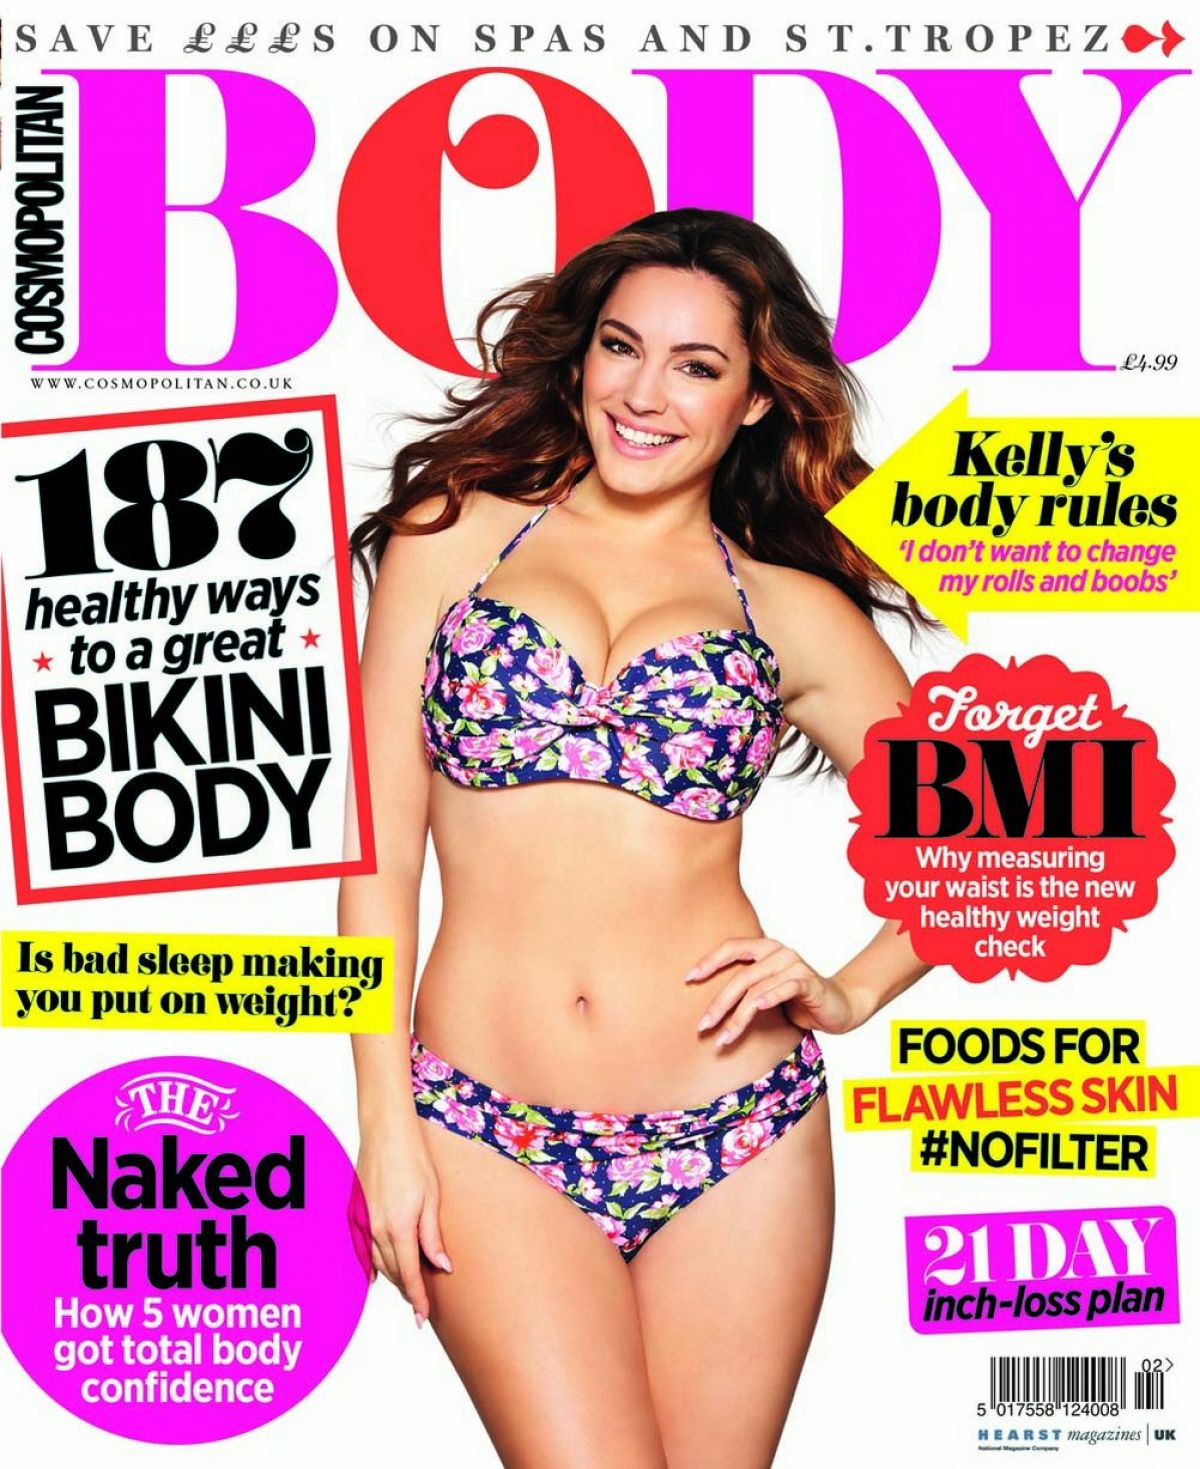 KELLY BROOK in Cosmopolitan Body Magazine, May 2014 Issue. 